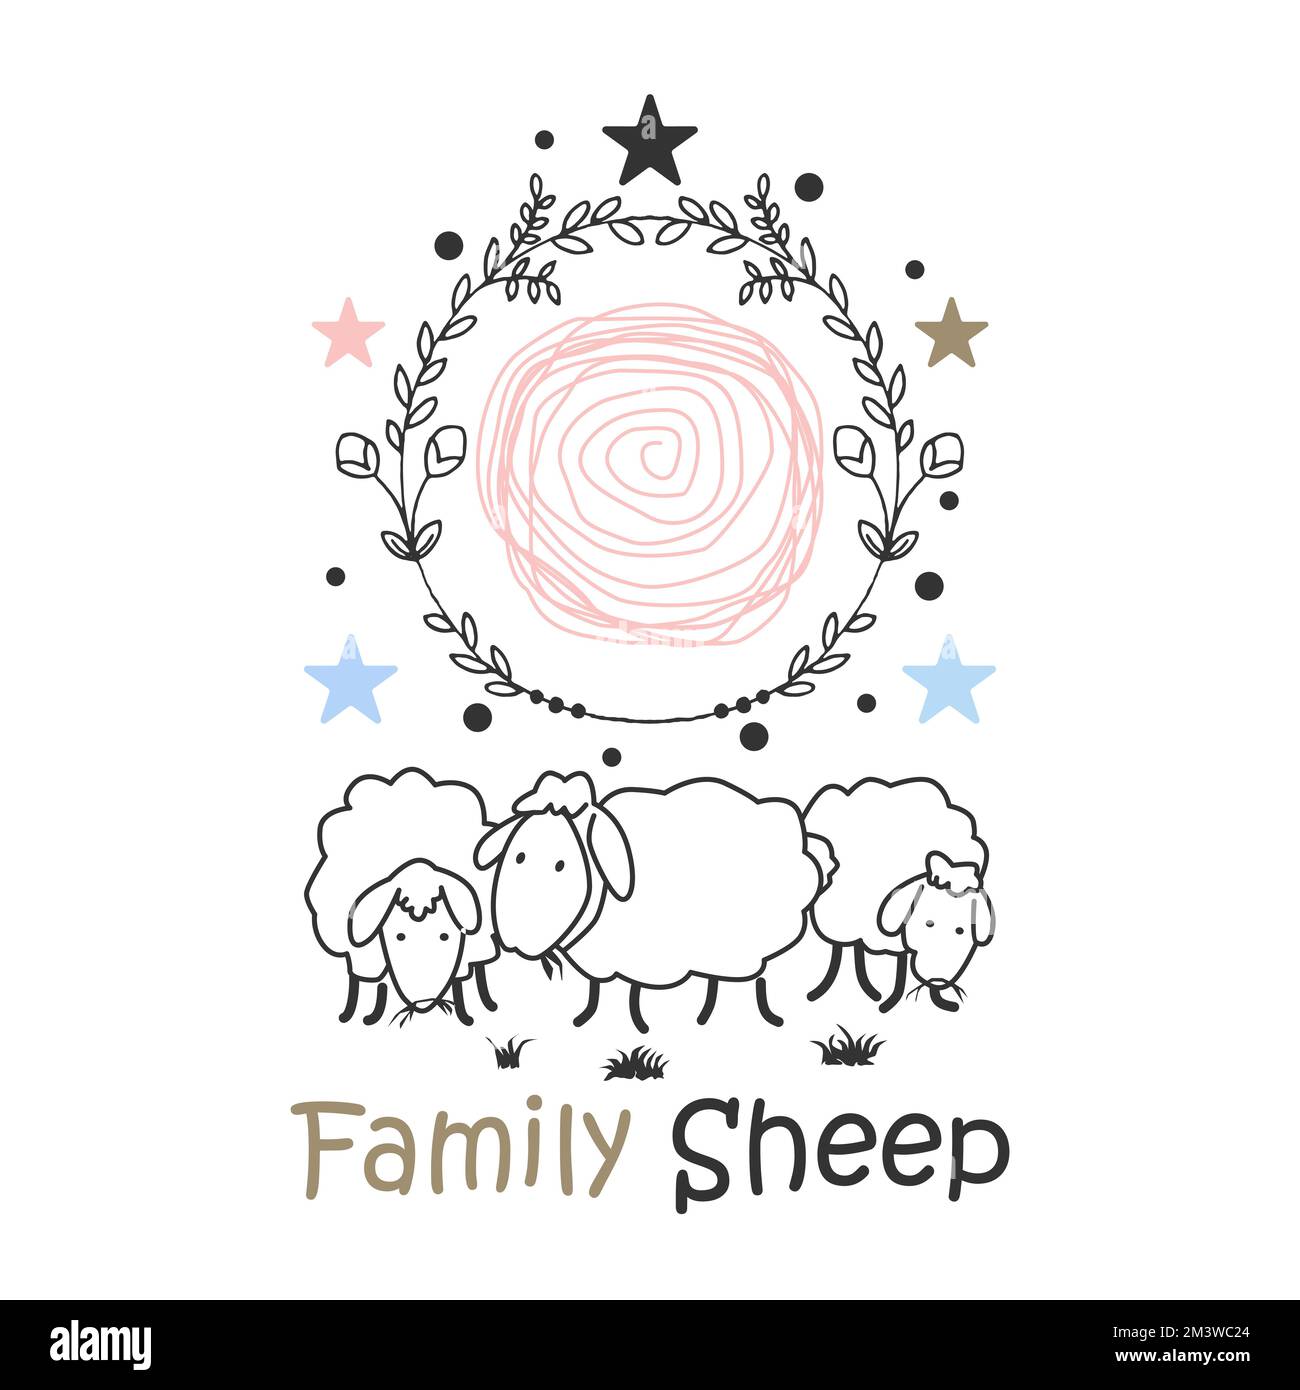 Family sheep looks happy when gathered in line out image graphic icon logo design abstract concept vector stock. used as a symbol related to animal Stock Vector